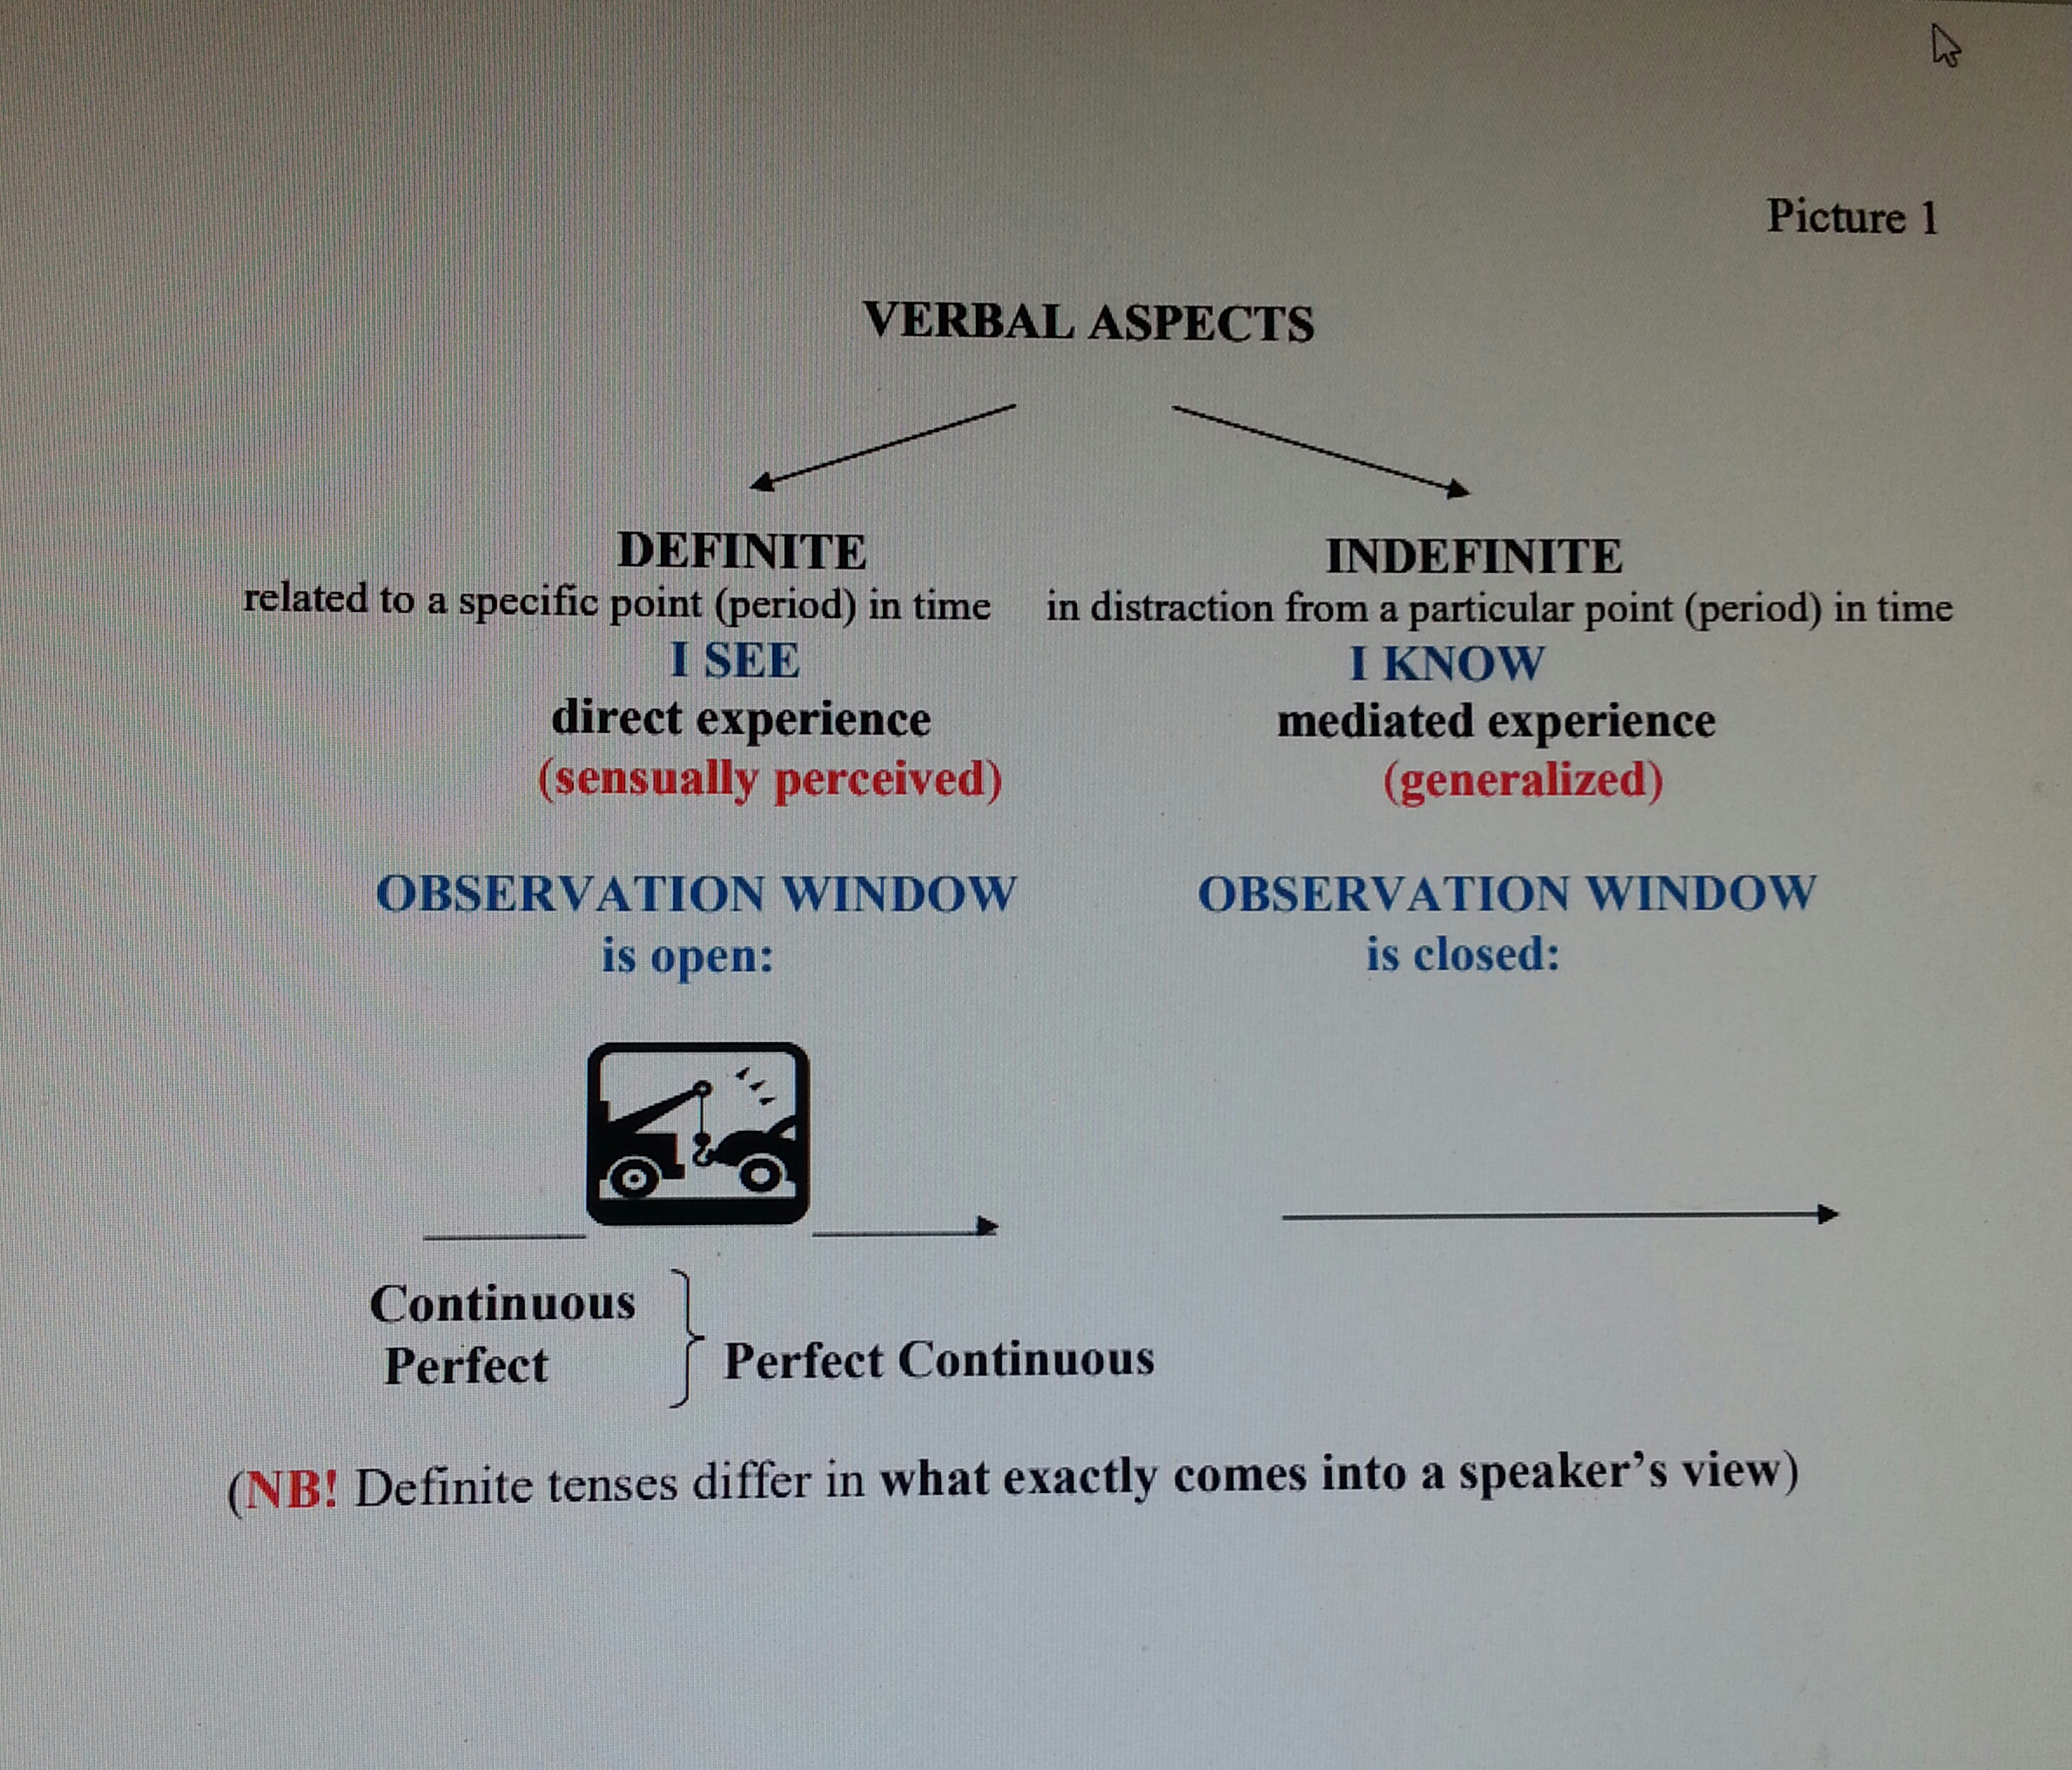 Verbal aspects ("OBSERVATIONAL WINDOW'")